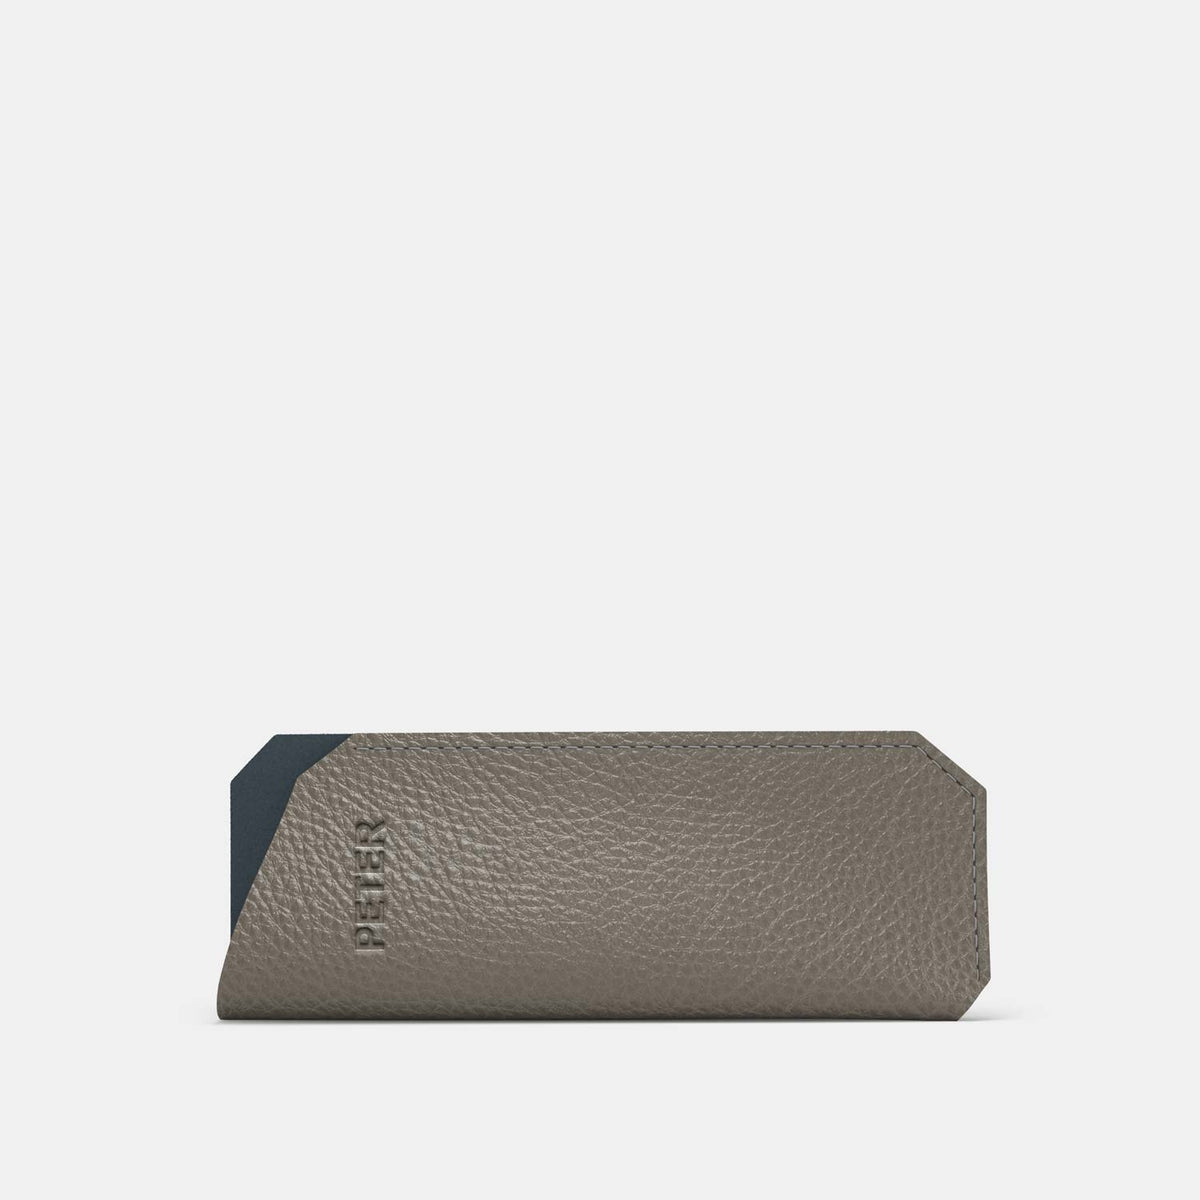 Leather Glasses case - Grey and Grey - RYAN London